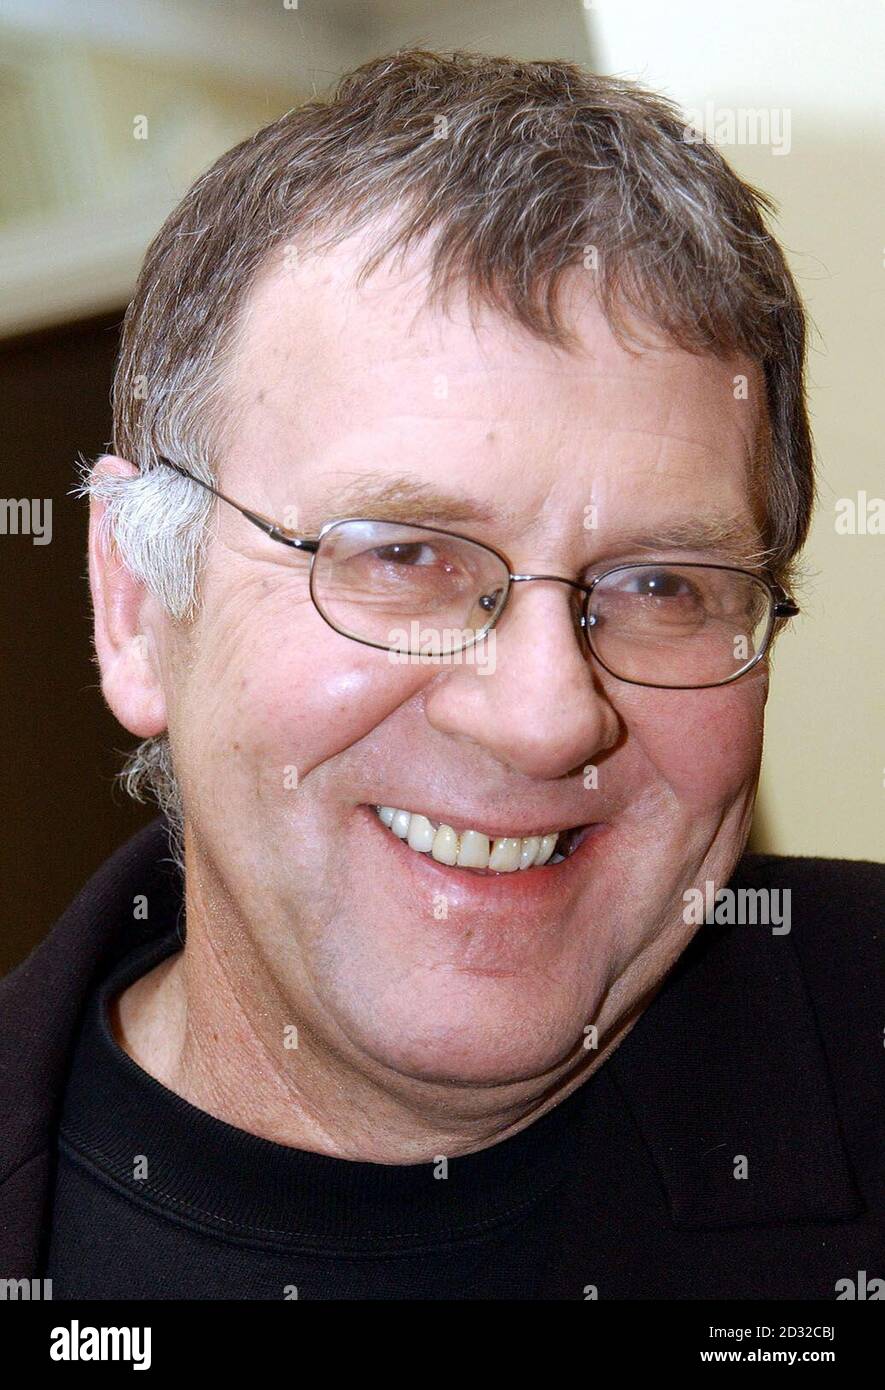 British actor Tom Wilkinson poses for photographers at Claridges in London, after he was nominated for the Best Actor Oscar for his role in the film 'In The Bedroom' during the Oscar nominations announcement in Los Angeles earlier. Stock Photo